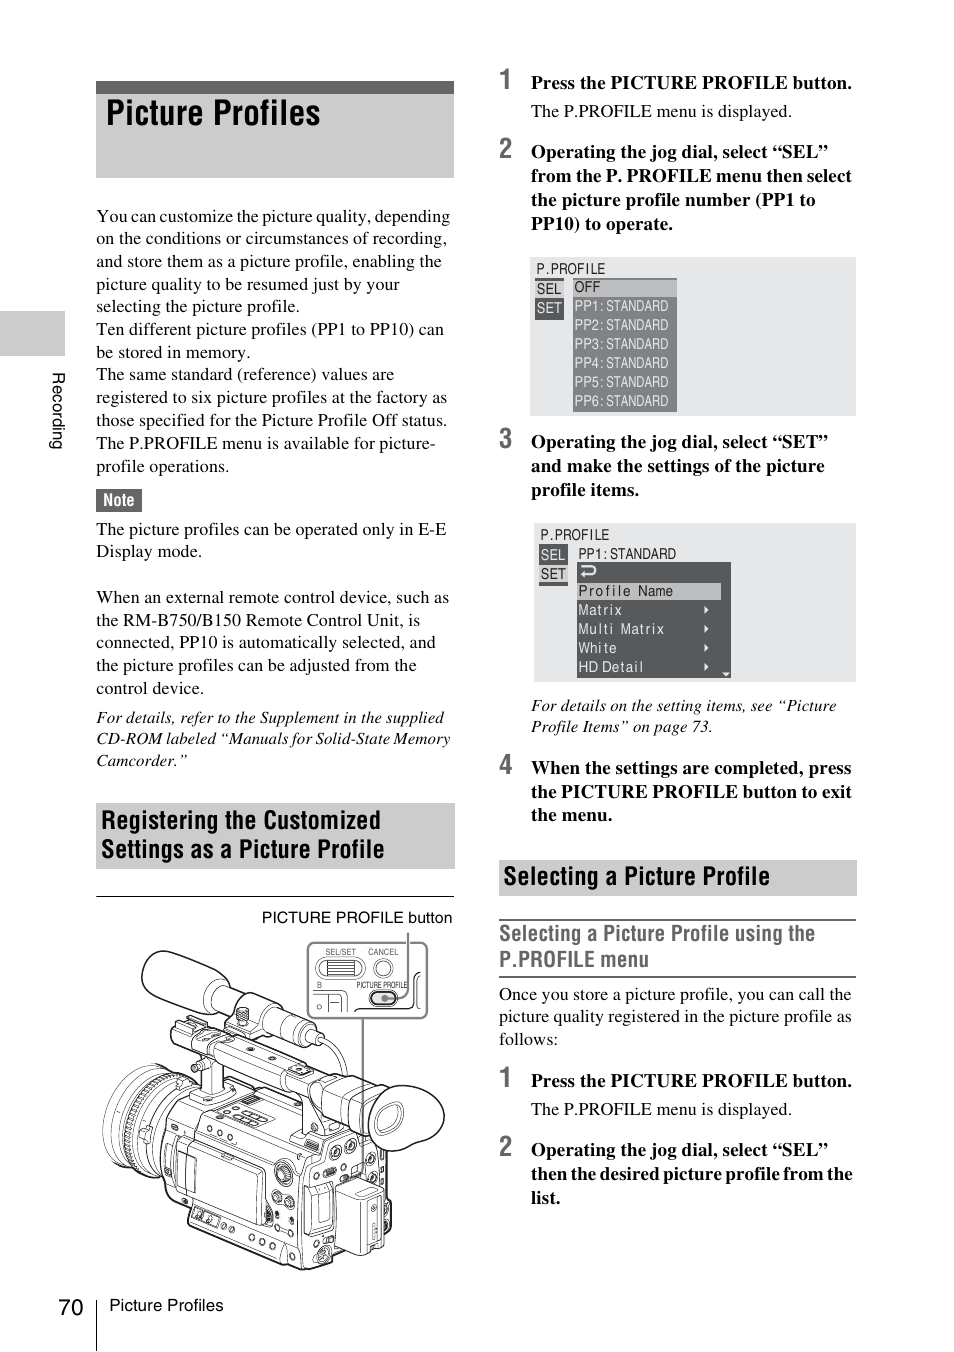 Picture profiles, Selecting a picture profile, Registering the customized settings as a picture | Profile | Sony PMW-F3K User Manual | Page 70 / 164